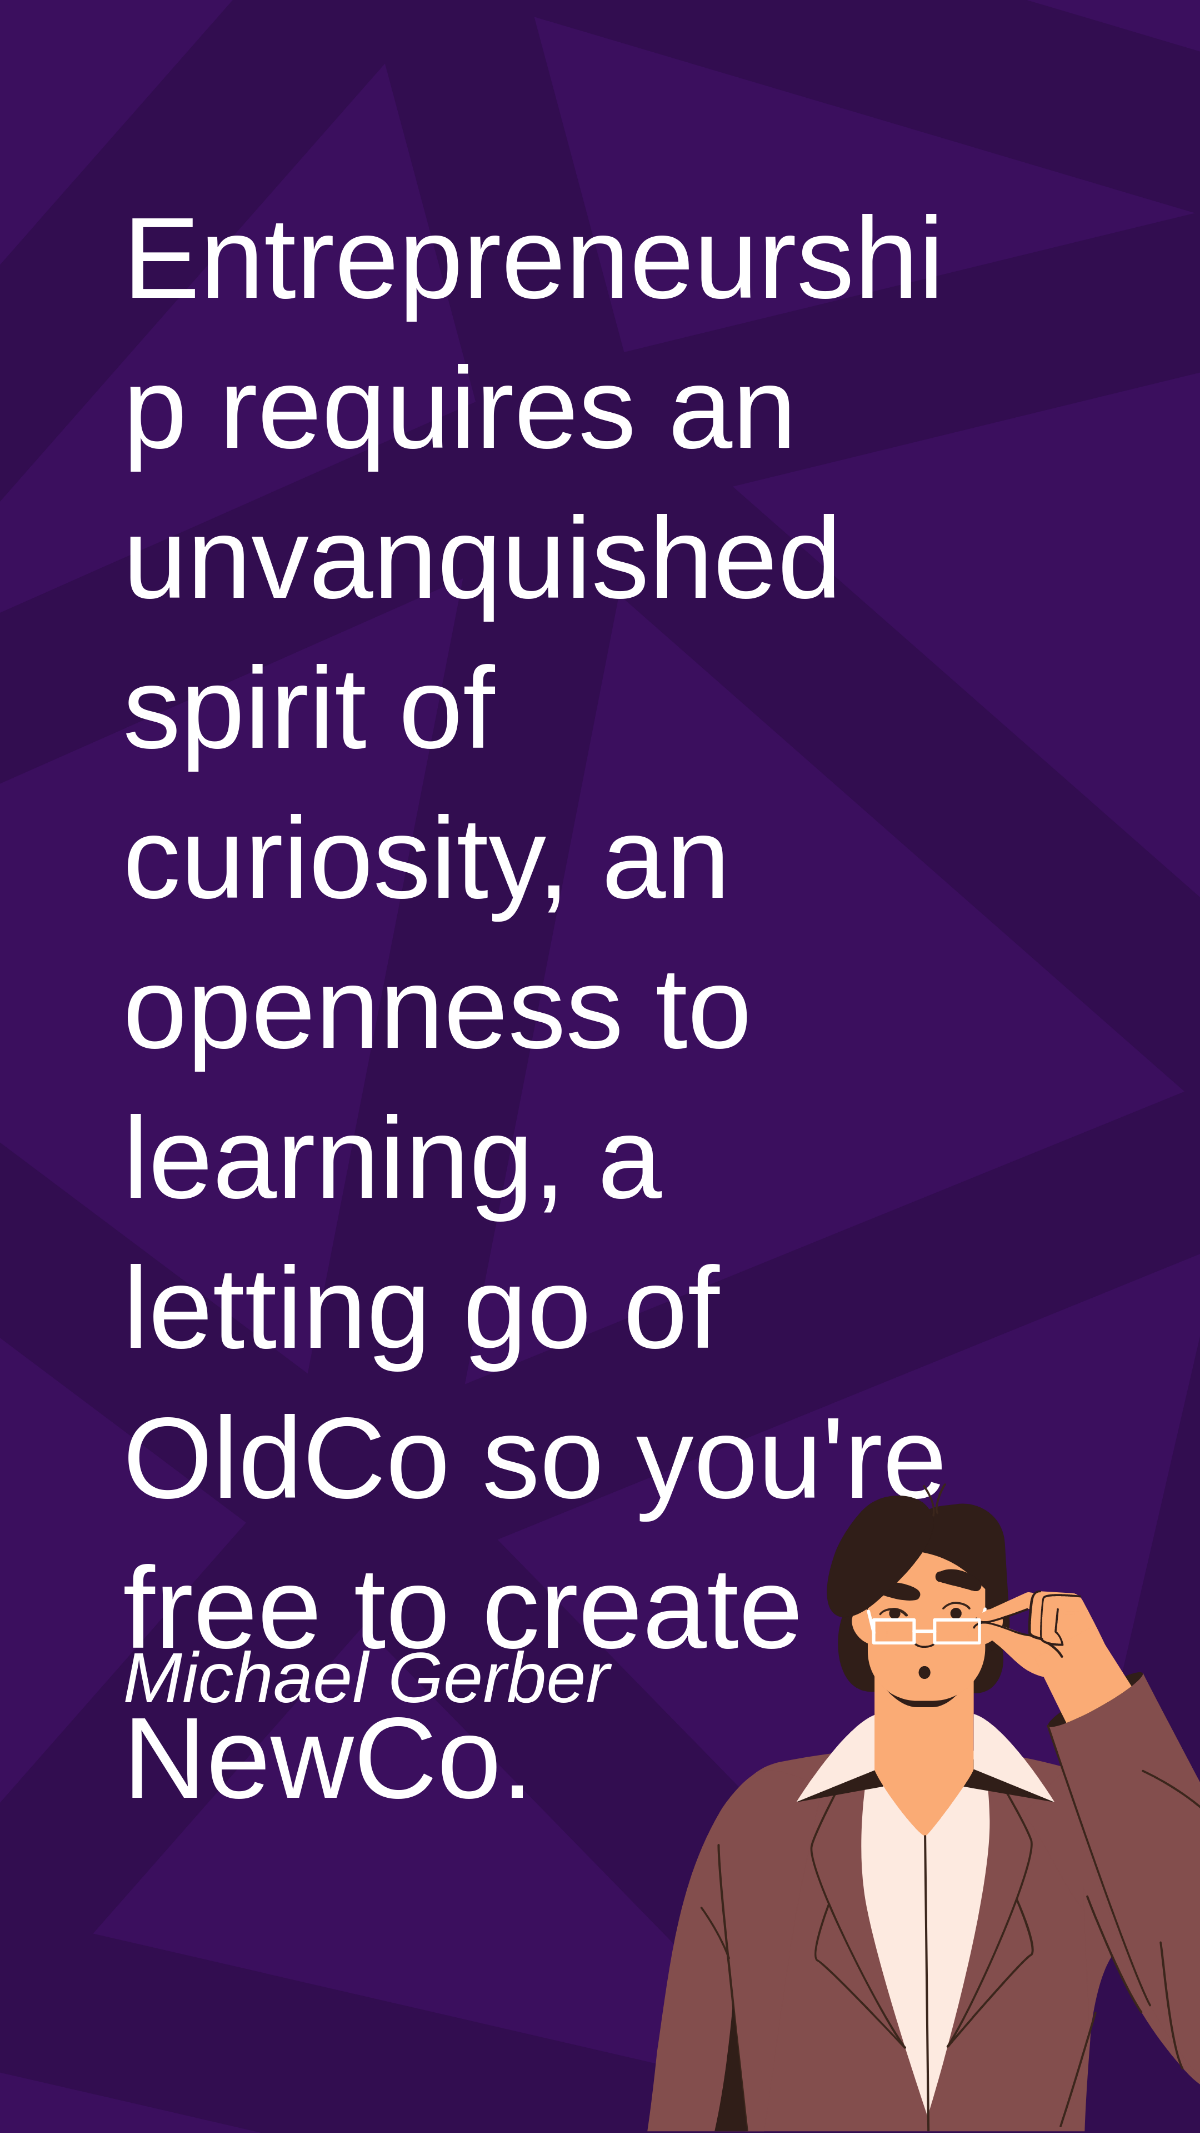 Michael Gerber - Entrepreneurship requires an unvanquished spirit of curiosity, an openness to learning, a letting go of OldCo so you're to create NewCo.